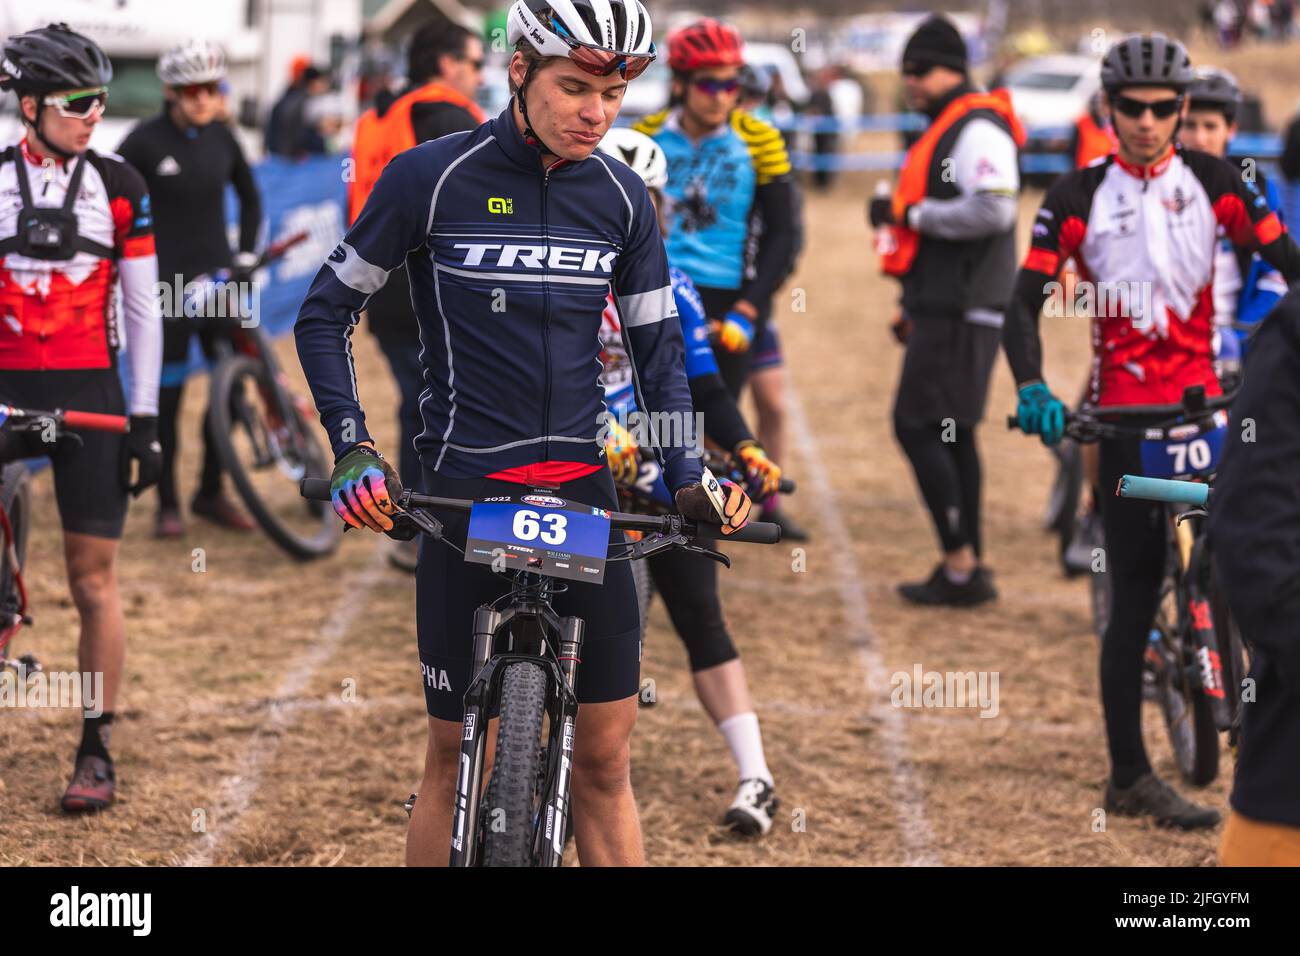 A Caucasian man getting ready to ride riding a bike in a race held in the DFW metroplex in Texas Stock Photo